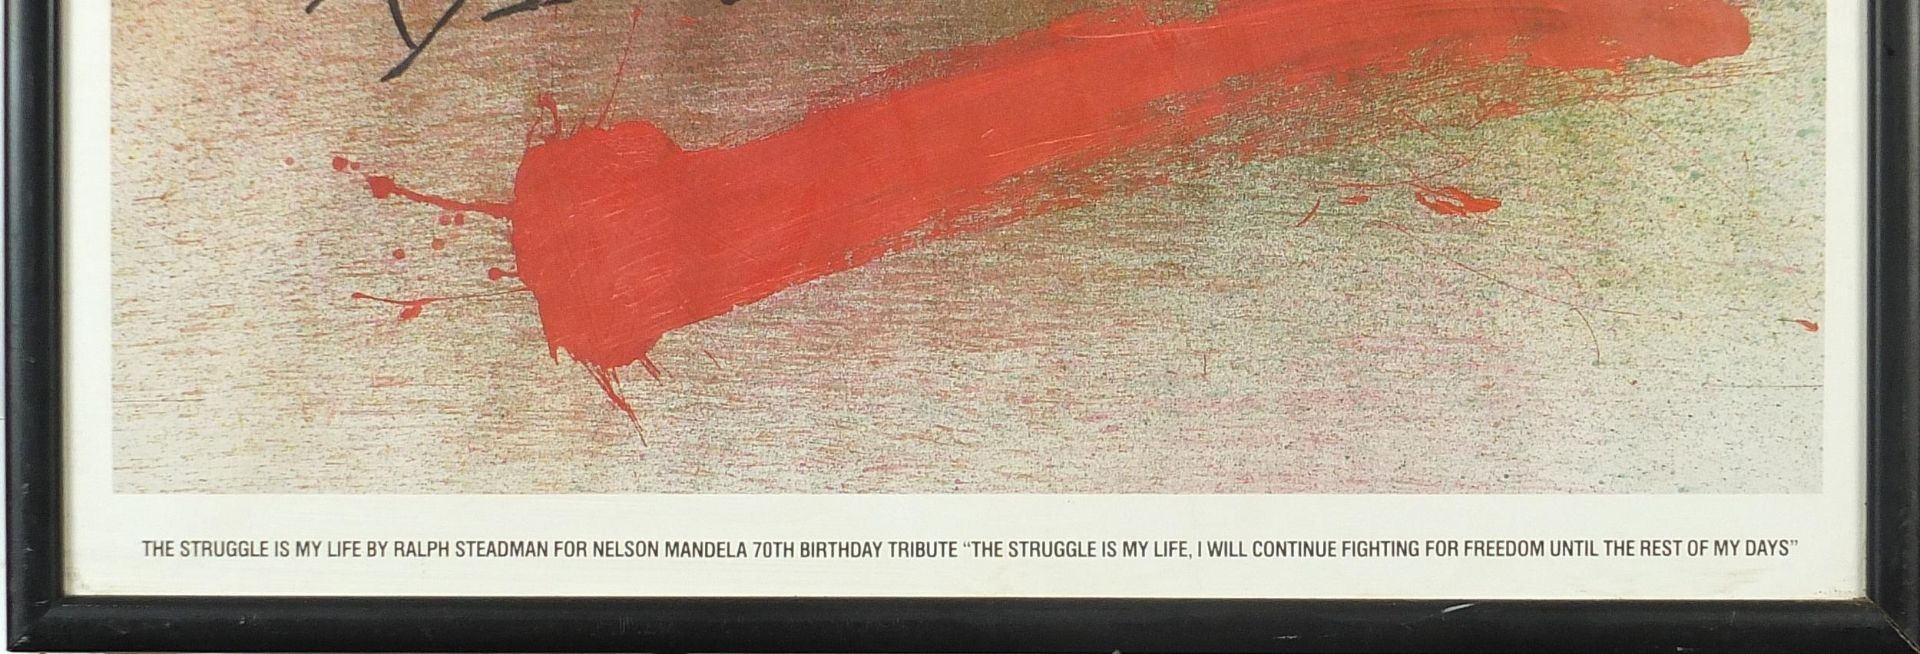 Set of five Nelson Mandela 70th birthday tribute posters including The Struggle is My Life by - Image 4 of 19